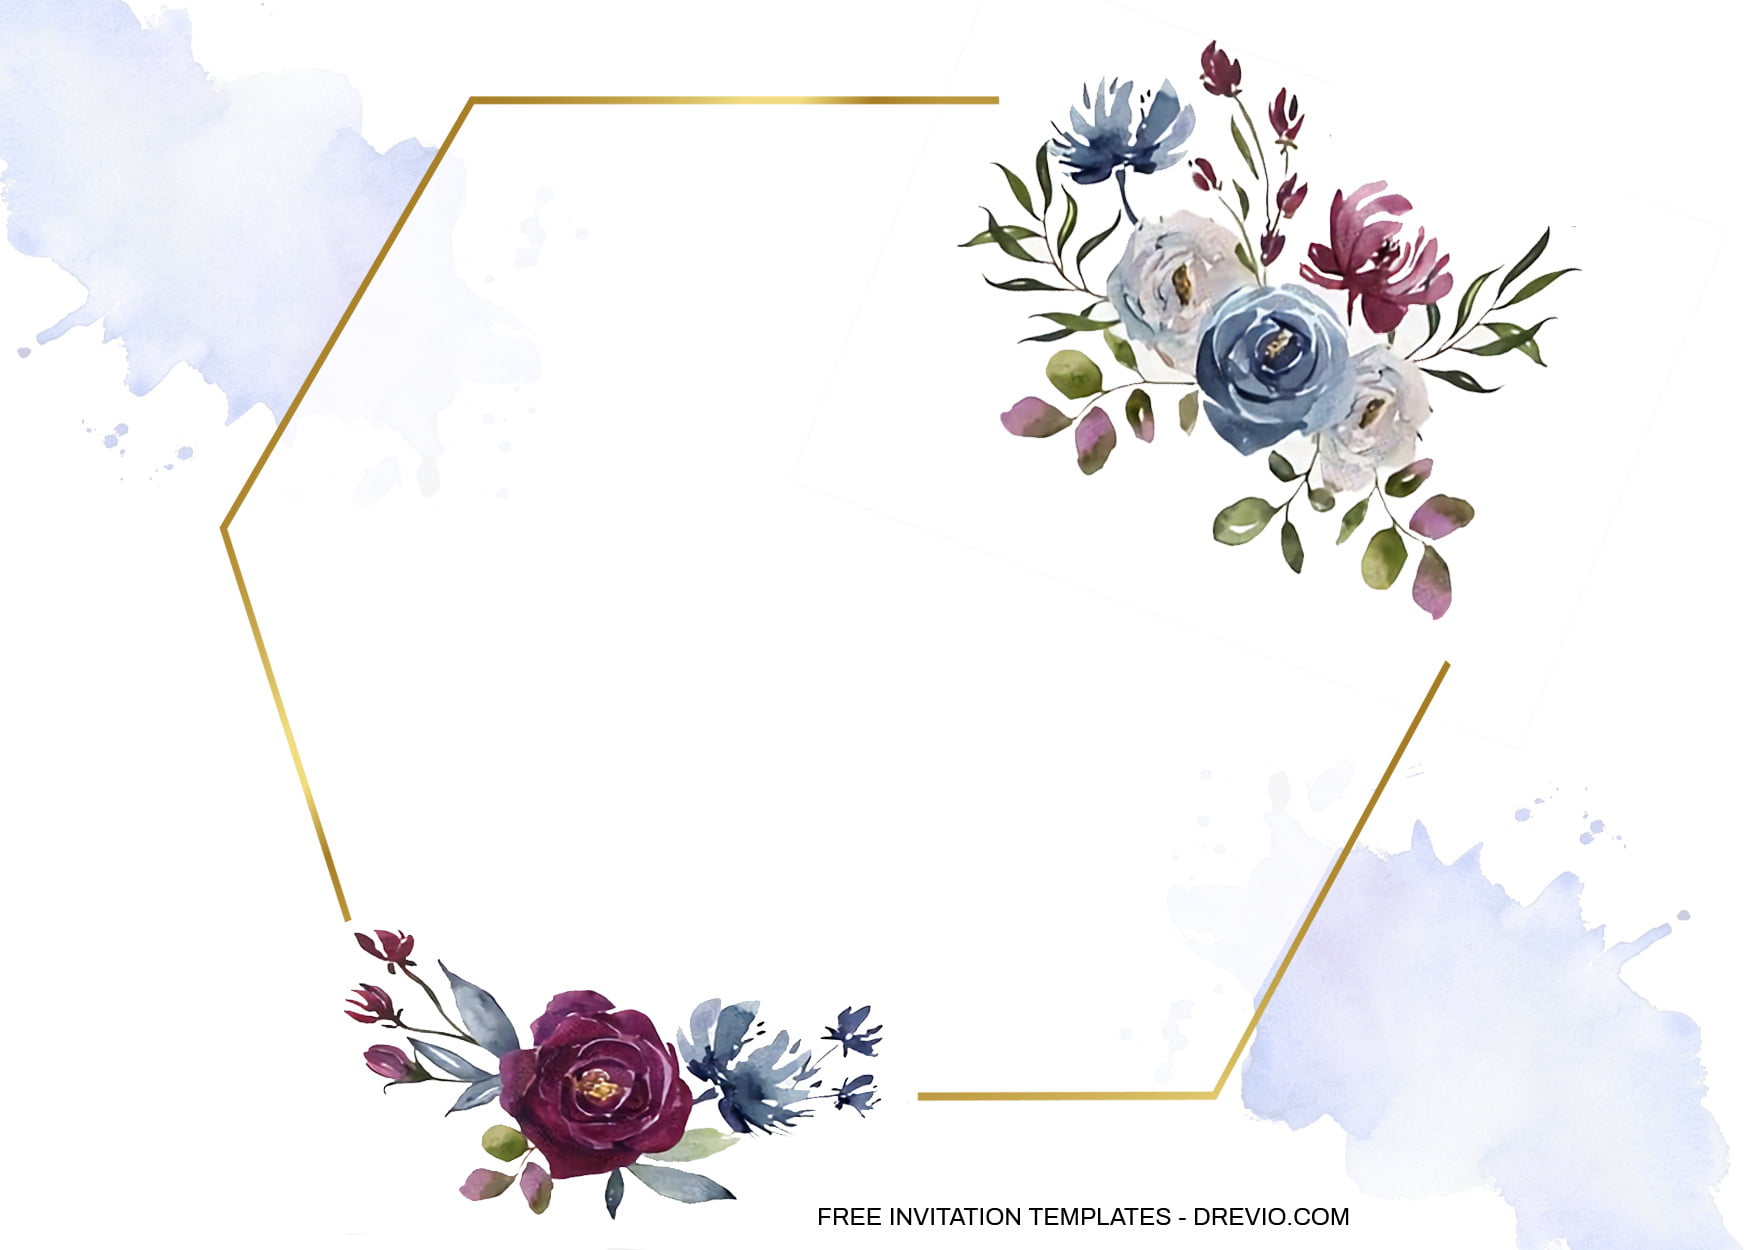 7+ Navy And Burgundy Floral Frame Invitation Templates